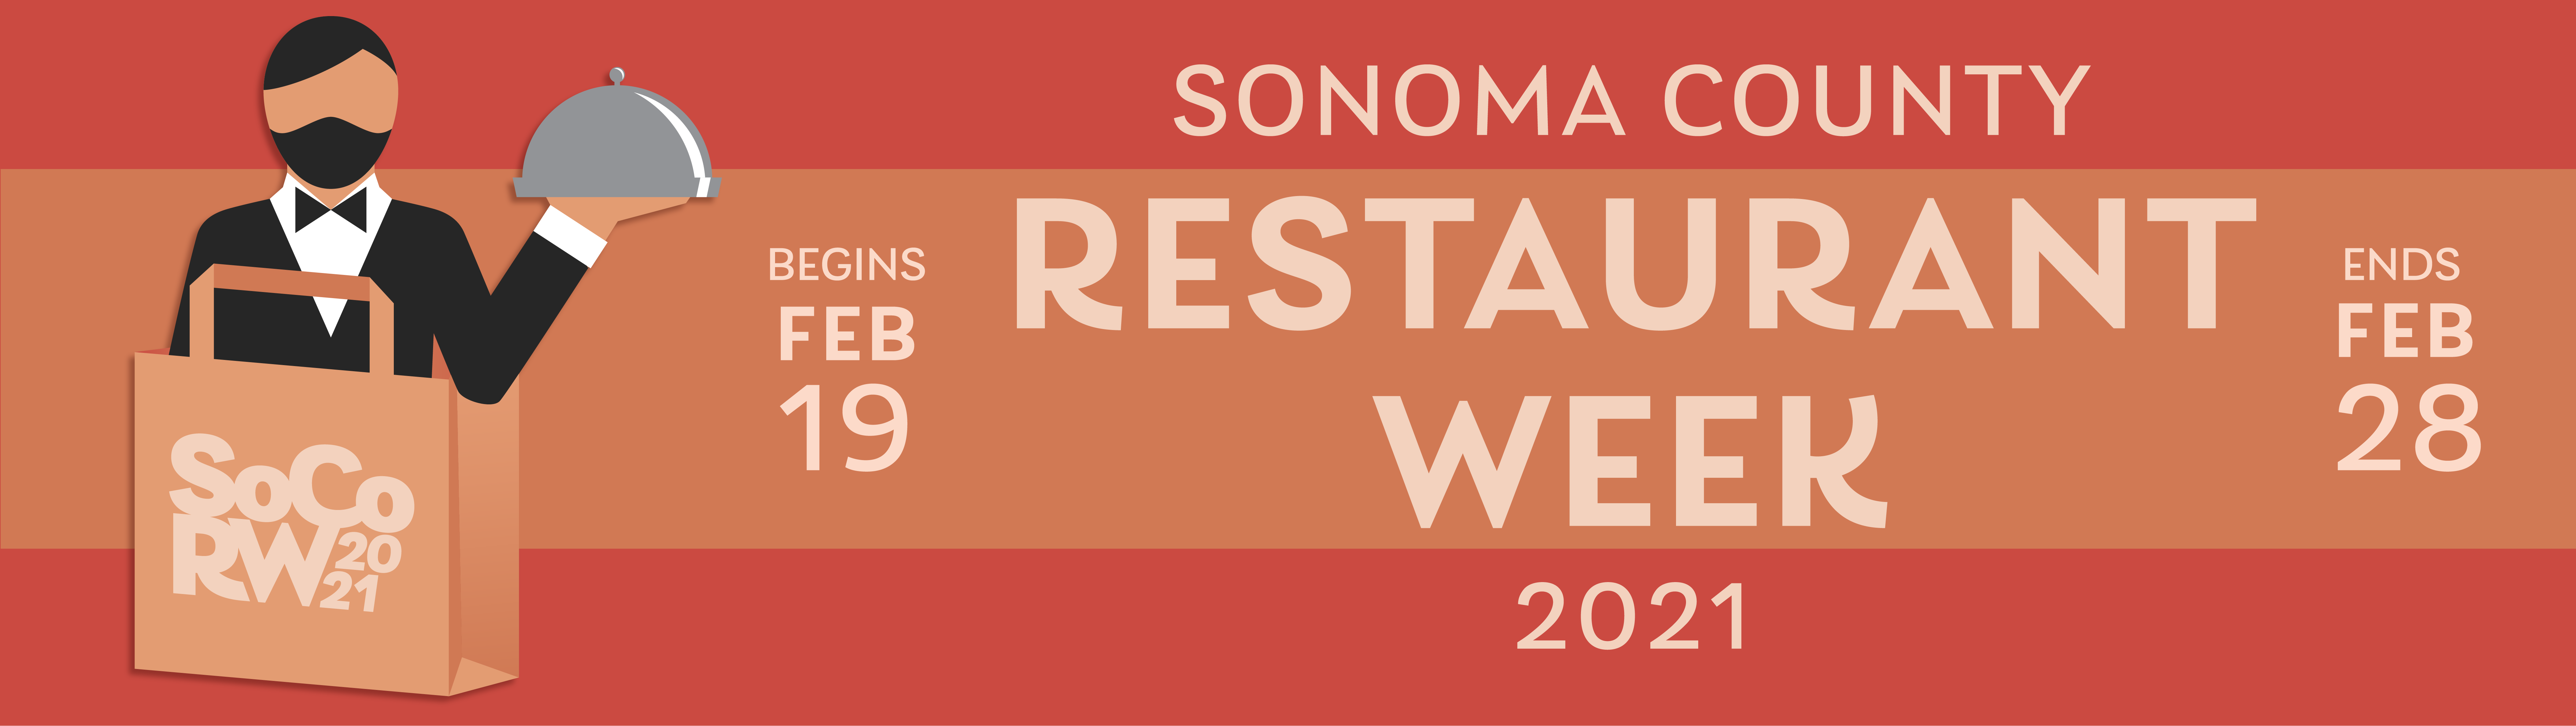 sonoma county restaurant week 2021. Begins February 19th. Ends February 28th. Restaurant week logo of waiter popping out of a take out bag.